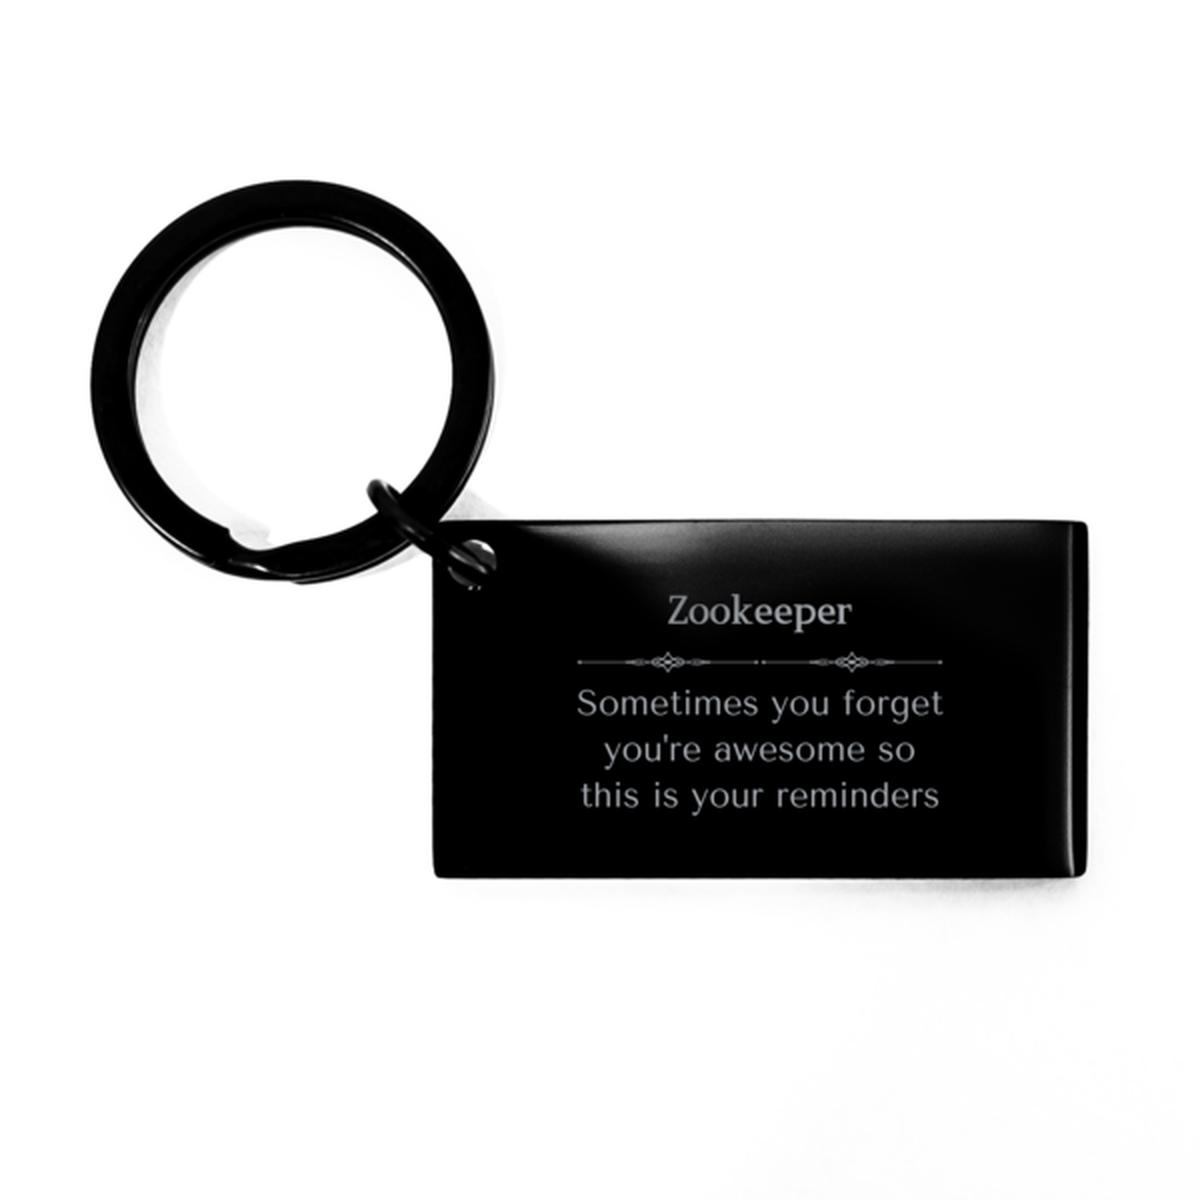 Sentimental Zookeeper Keychain, Band Director Sometimes you forget you're awesome so this is your reminders, Graduation Christmas Birthday Gifts for Zookeeper, Men, Women, Coworkers